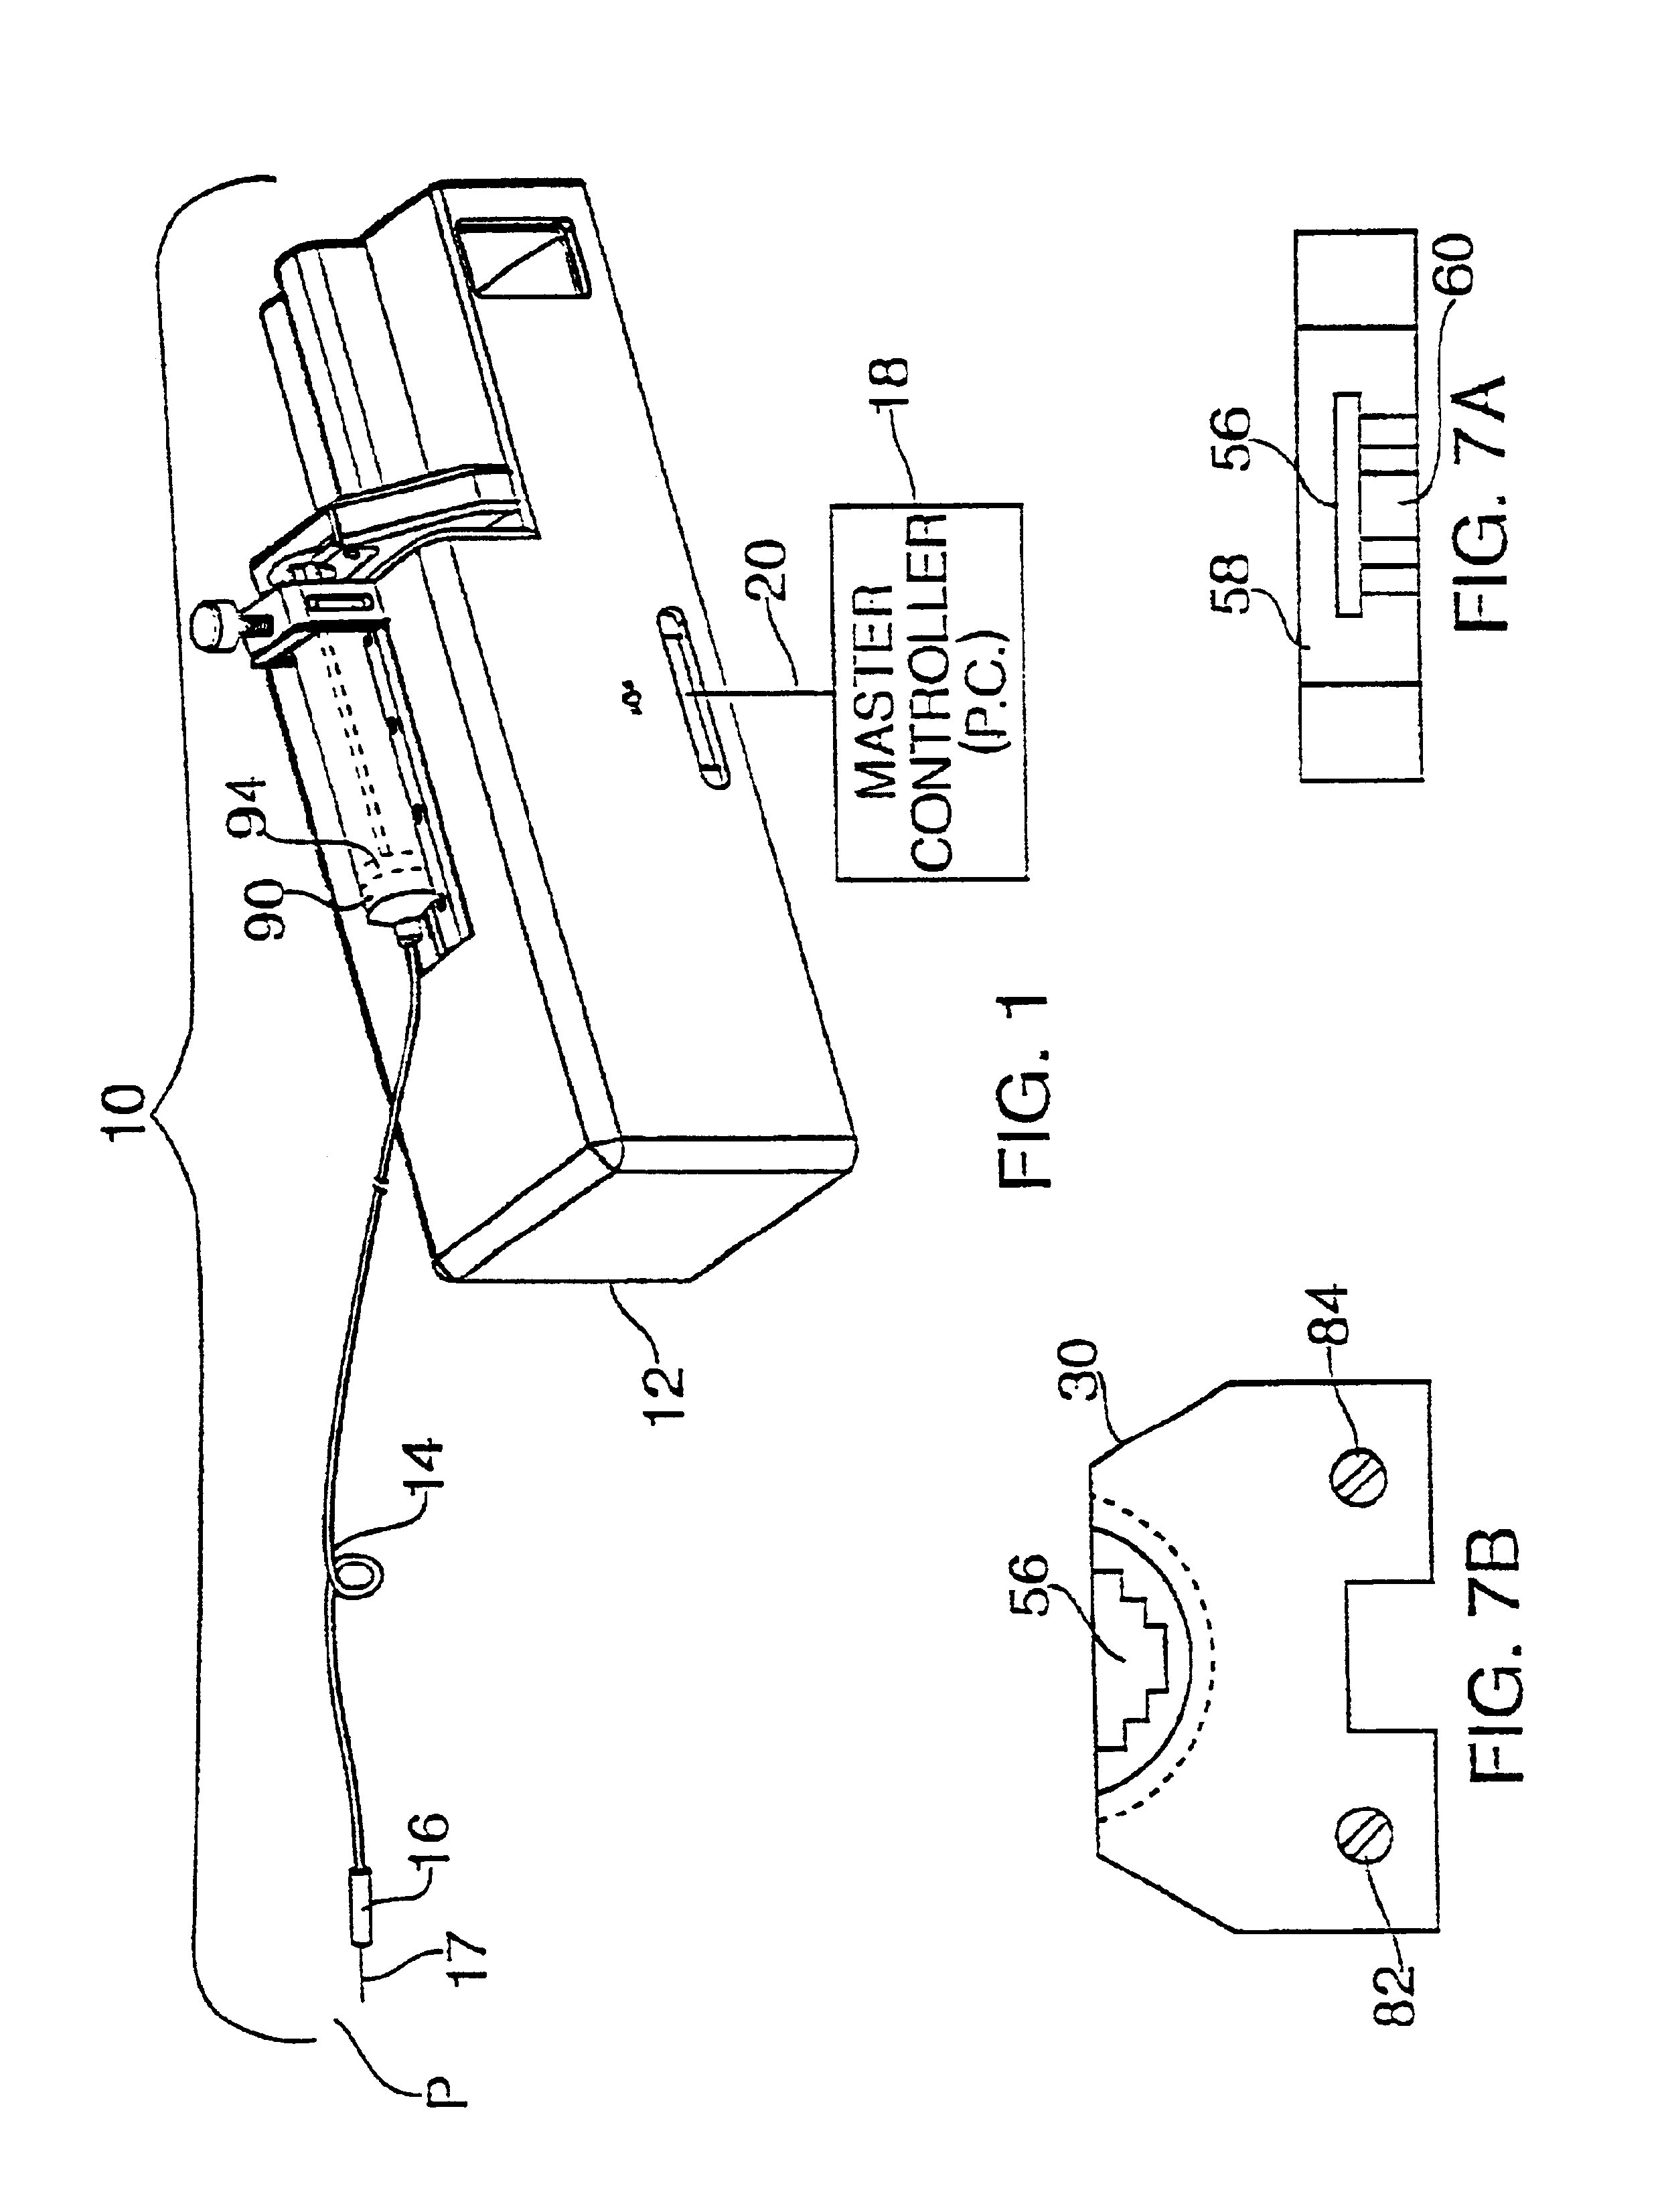 Pressure/force computer controlled drug delivery system with automated charging